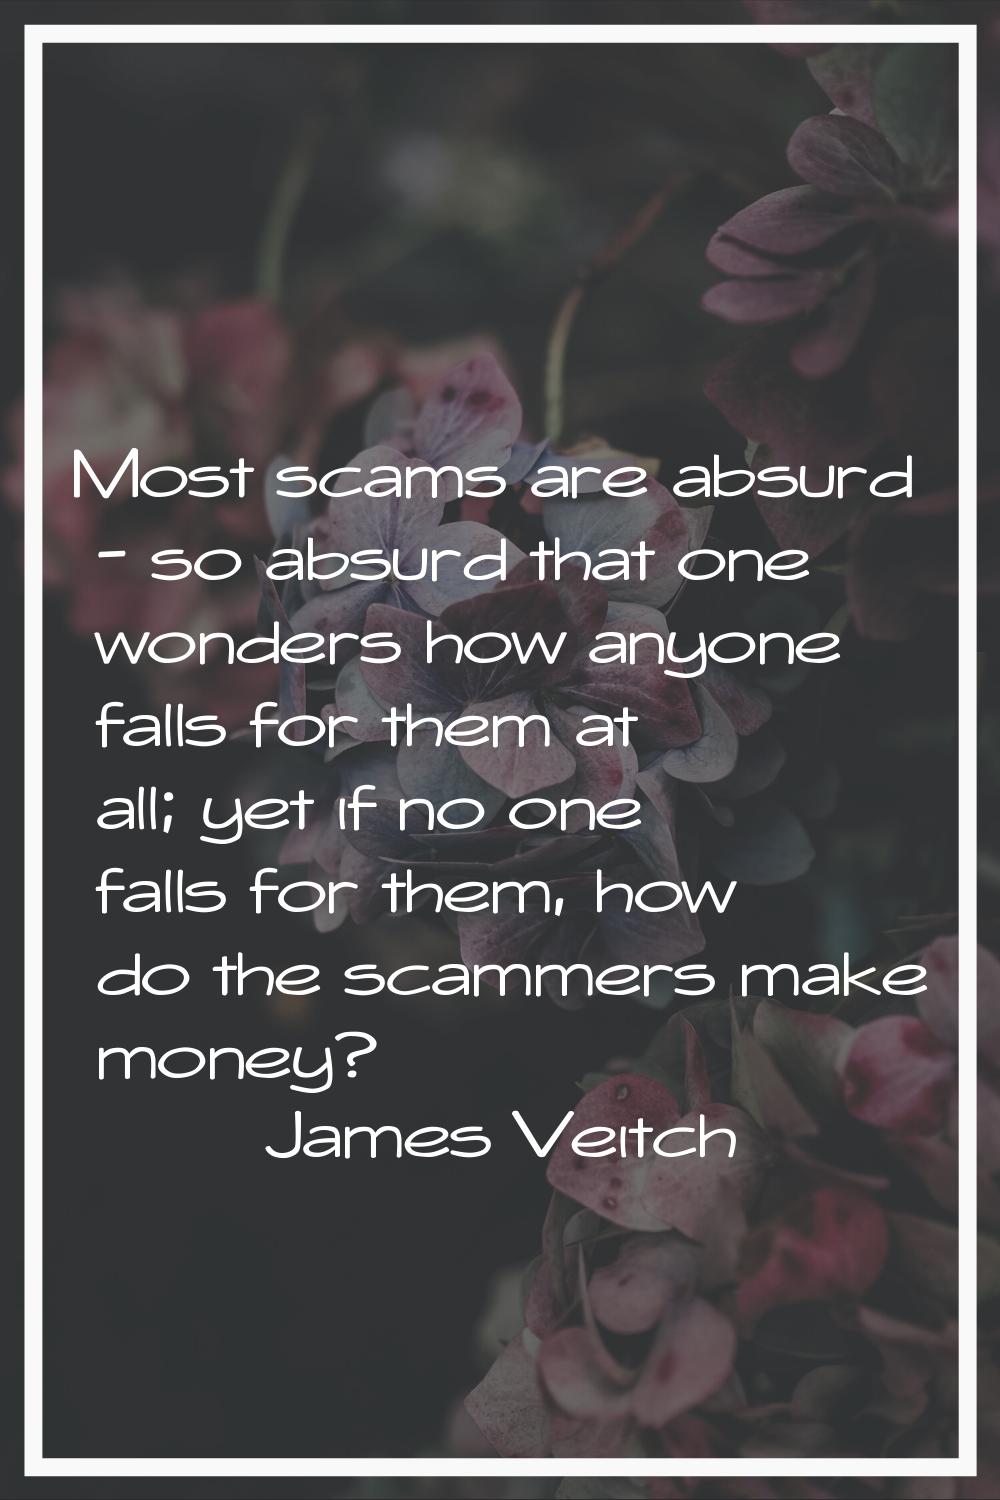 Most scams are absurd - so absurd that one wonders how anyone falls for them at all; yet if no one 